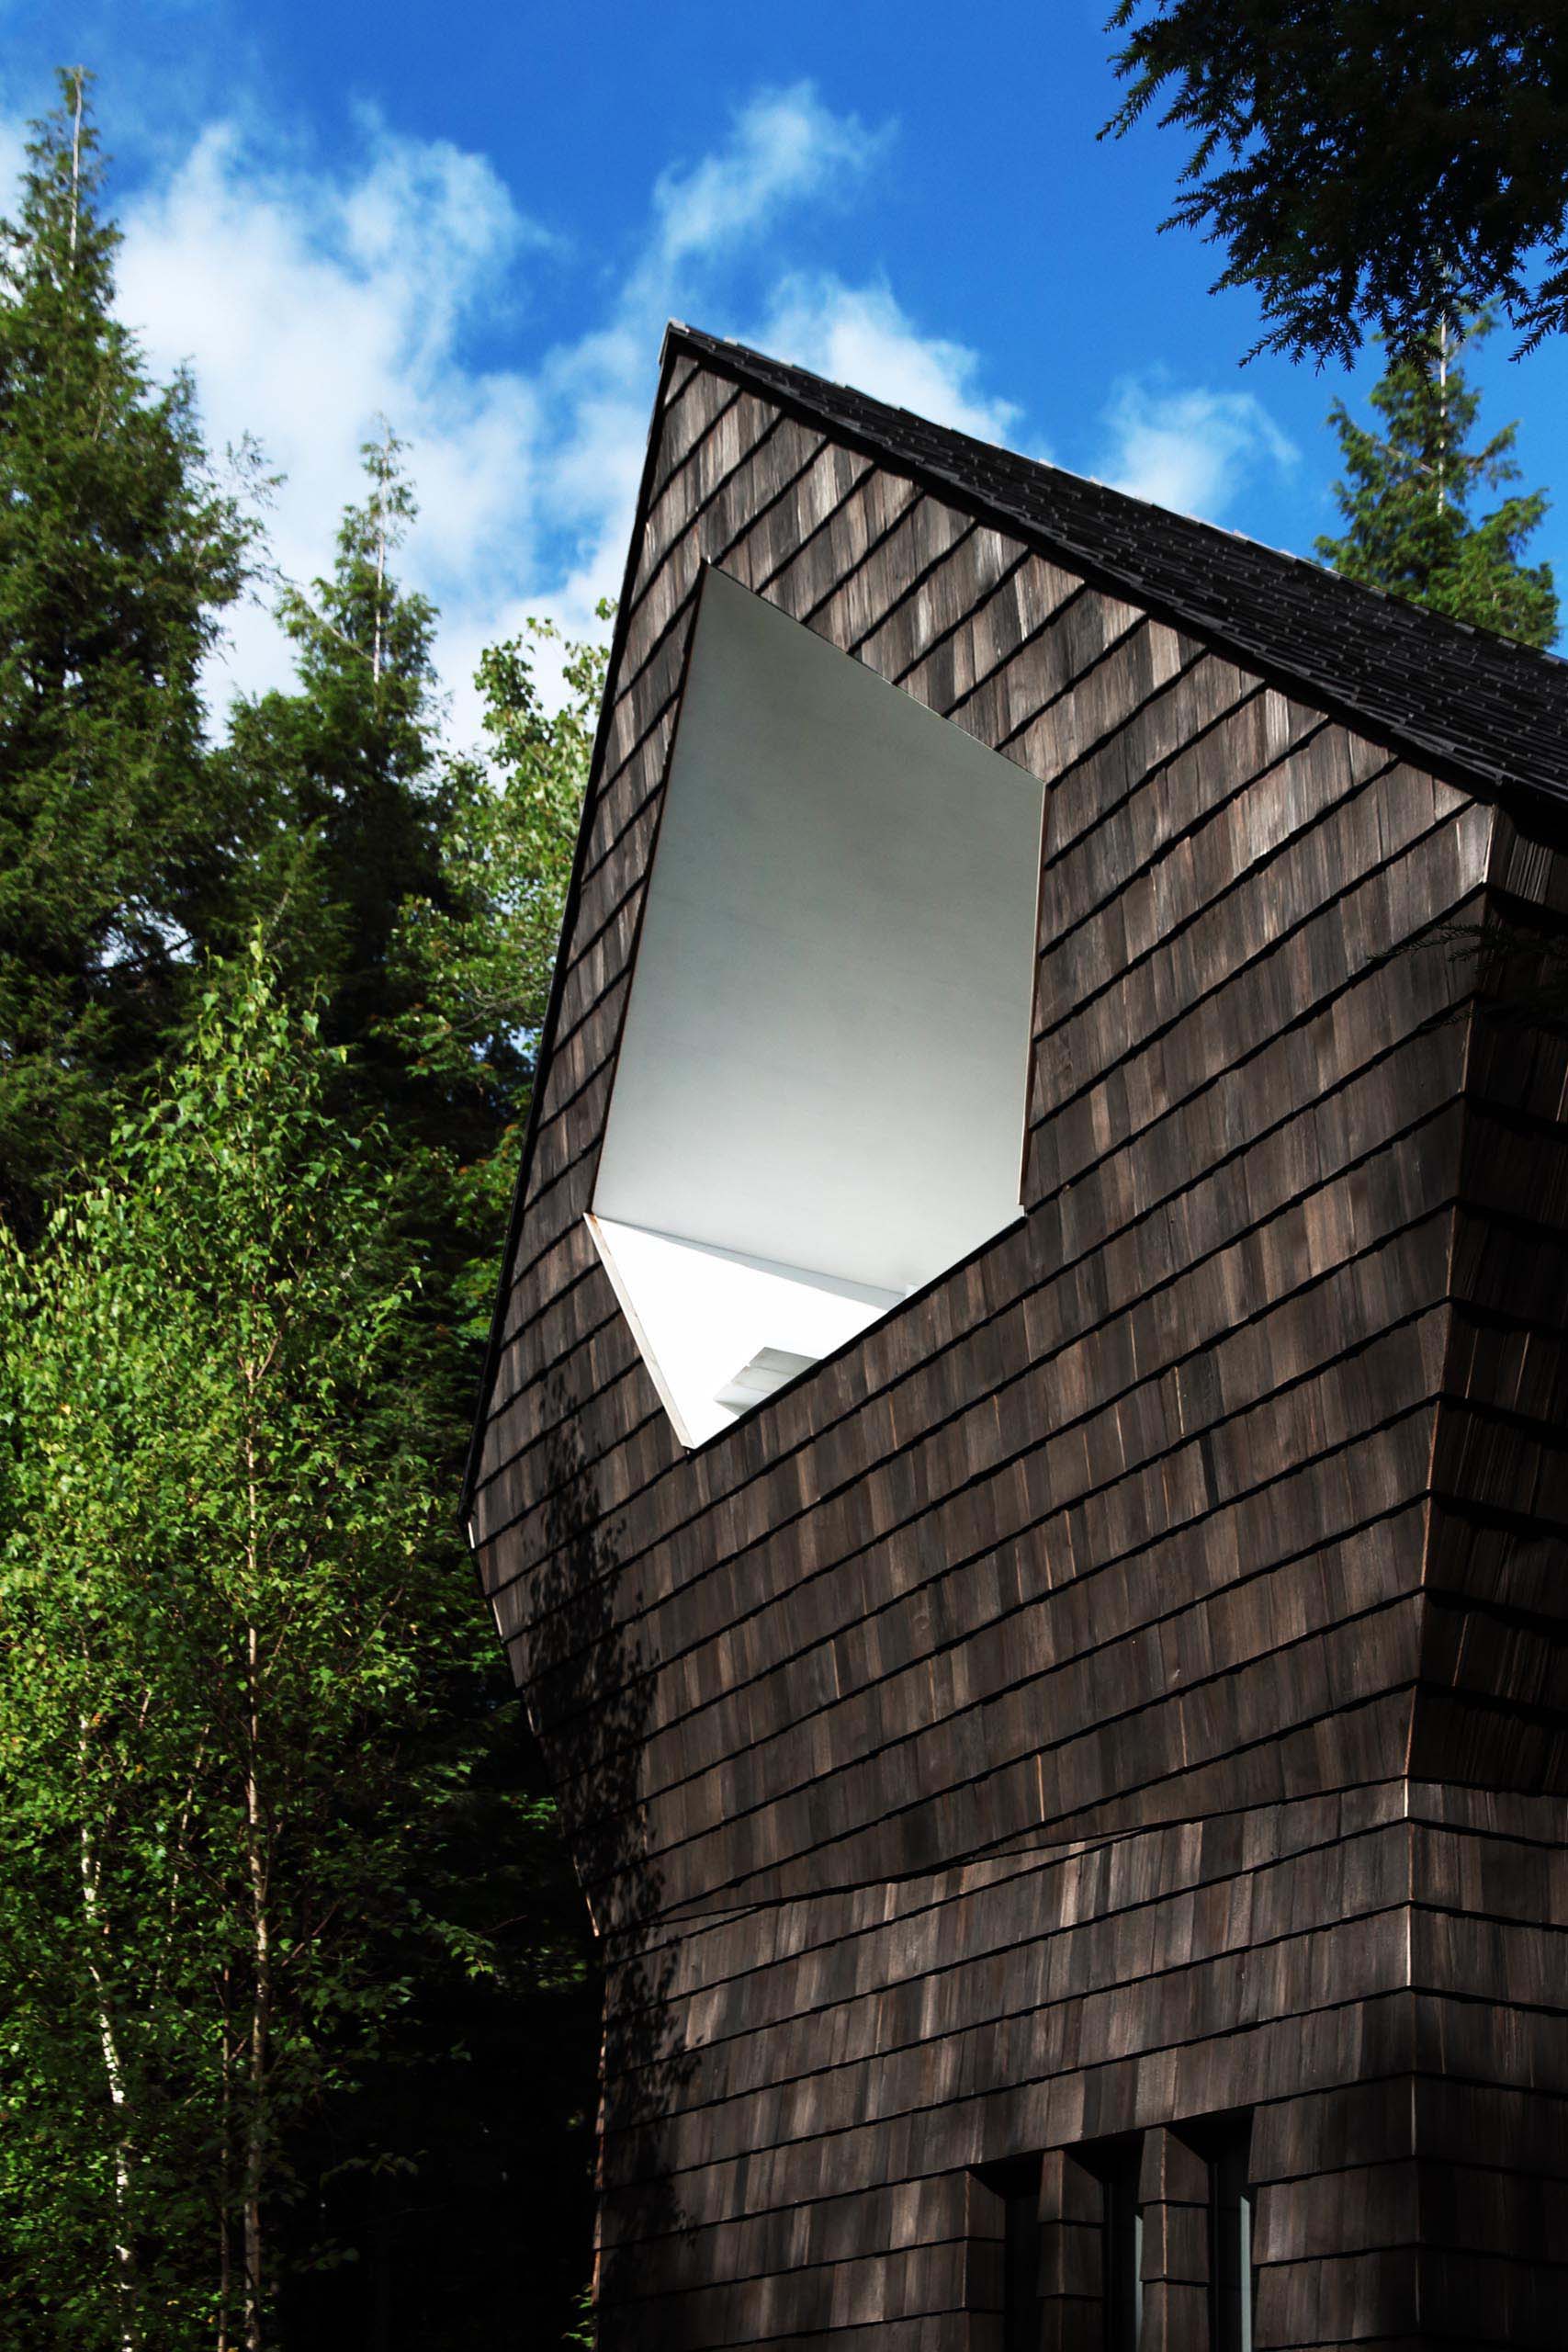 A small wood shingle cottage with a pentagonal shaped terrace that's recessed into the wood shingle clad building.